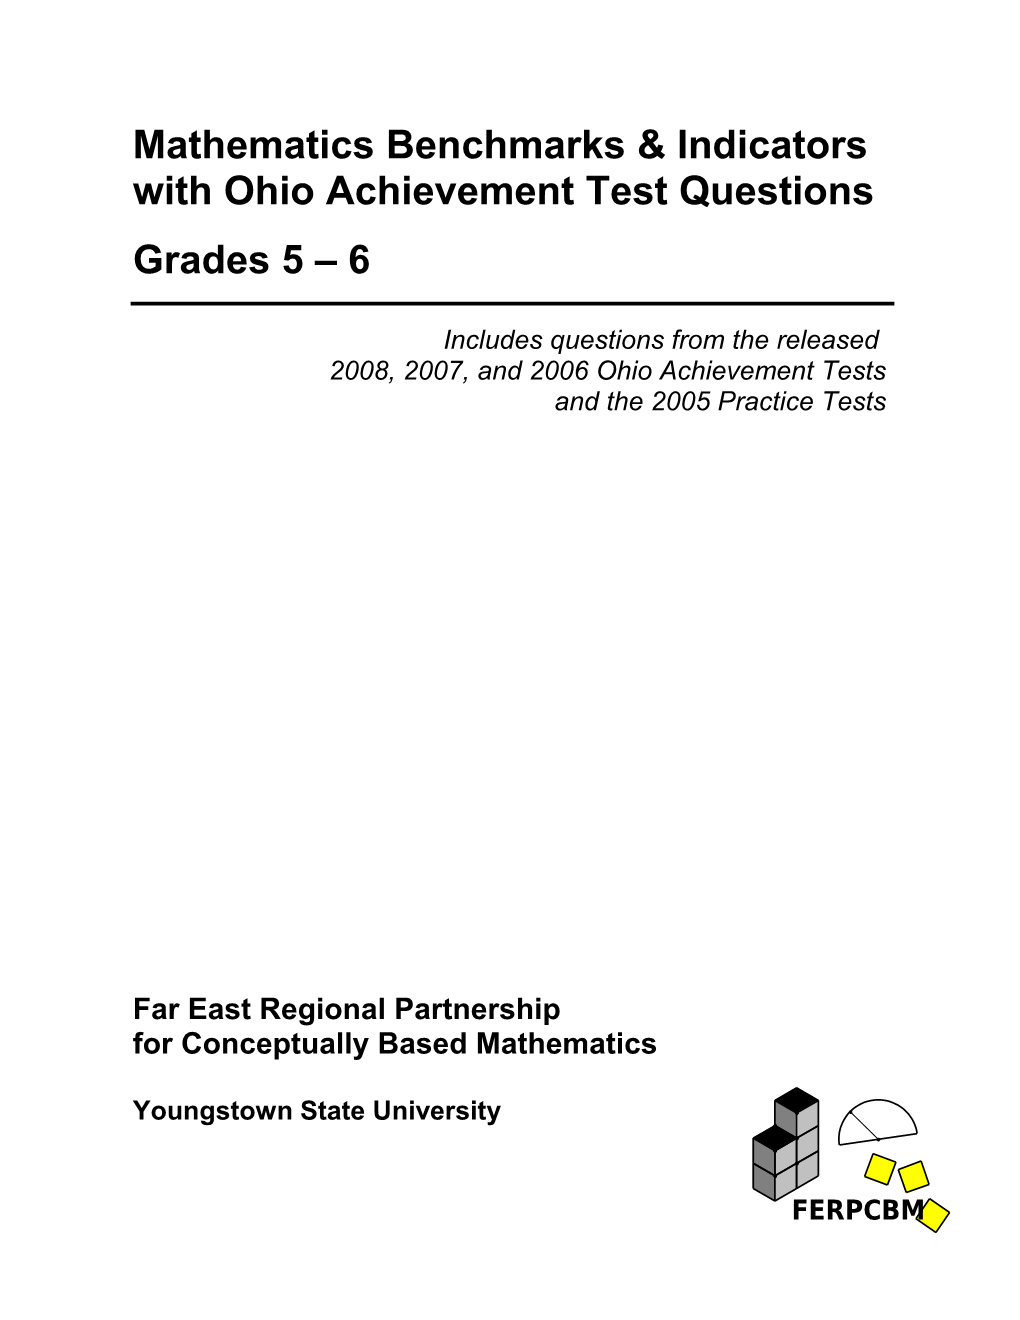 With Ohio Achievement Test Questions